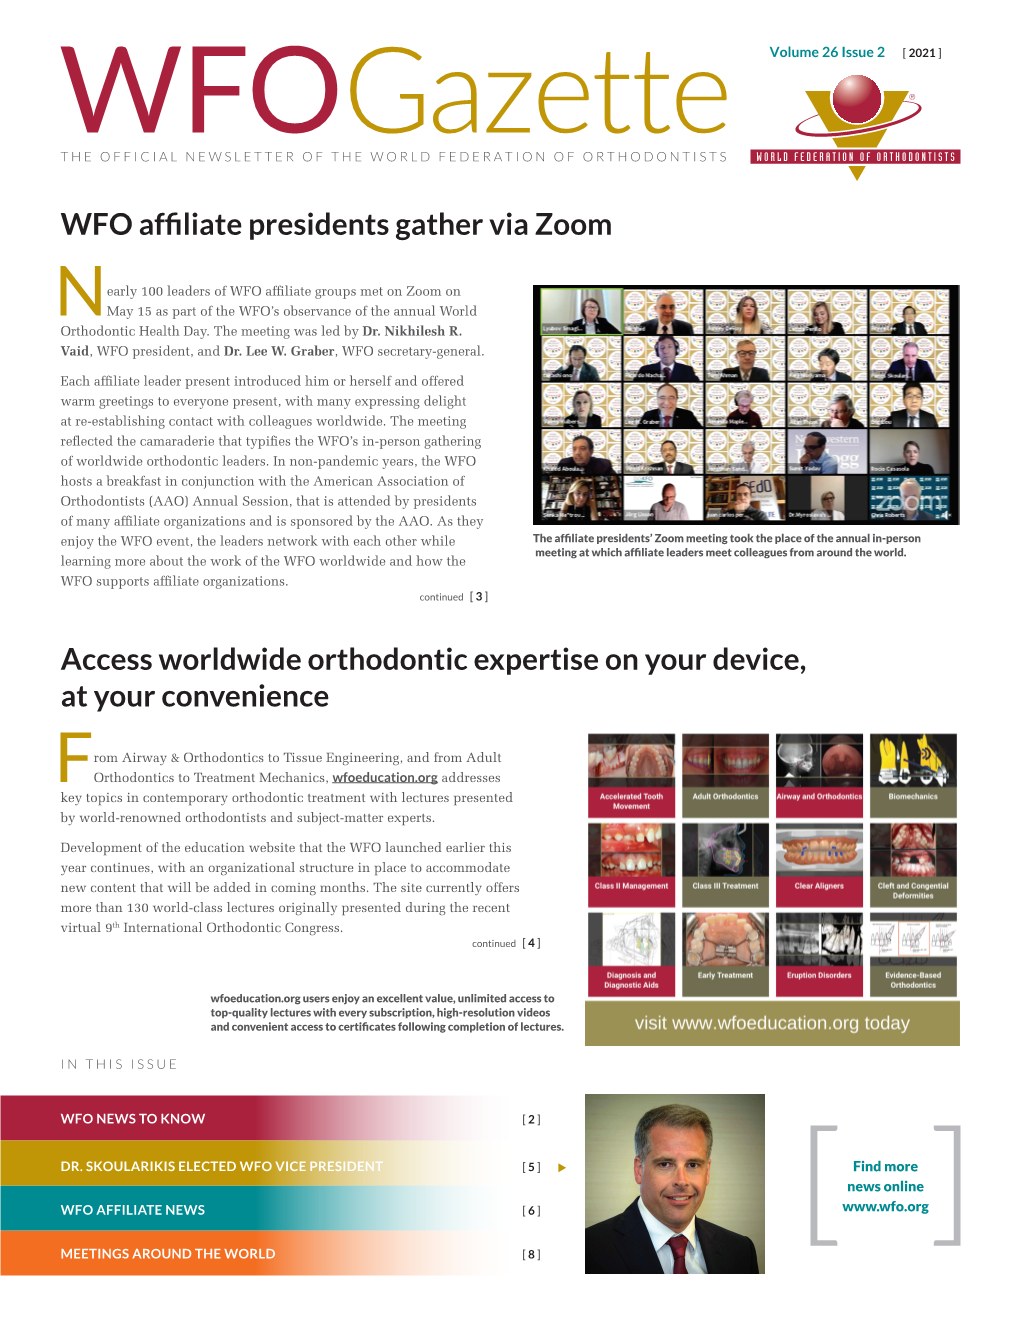 WFO Affiliate Presidents Gather Via Zoom Access Worldwide Orthodontic Expertise on Your Device, at Your Convenience